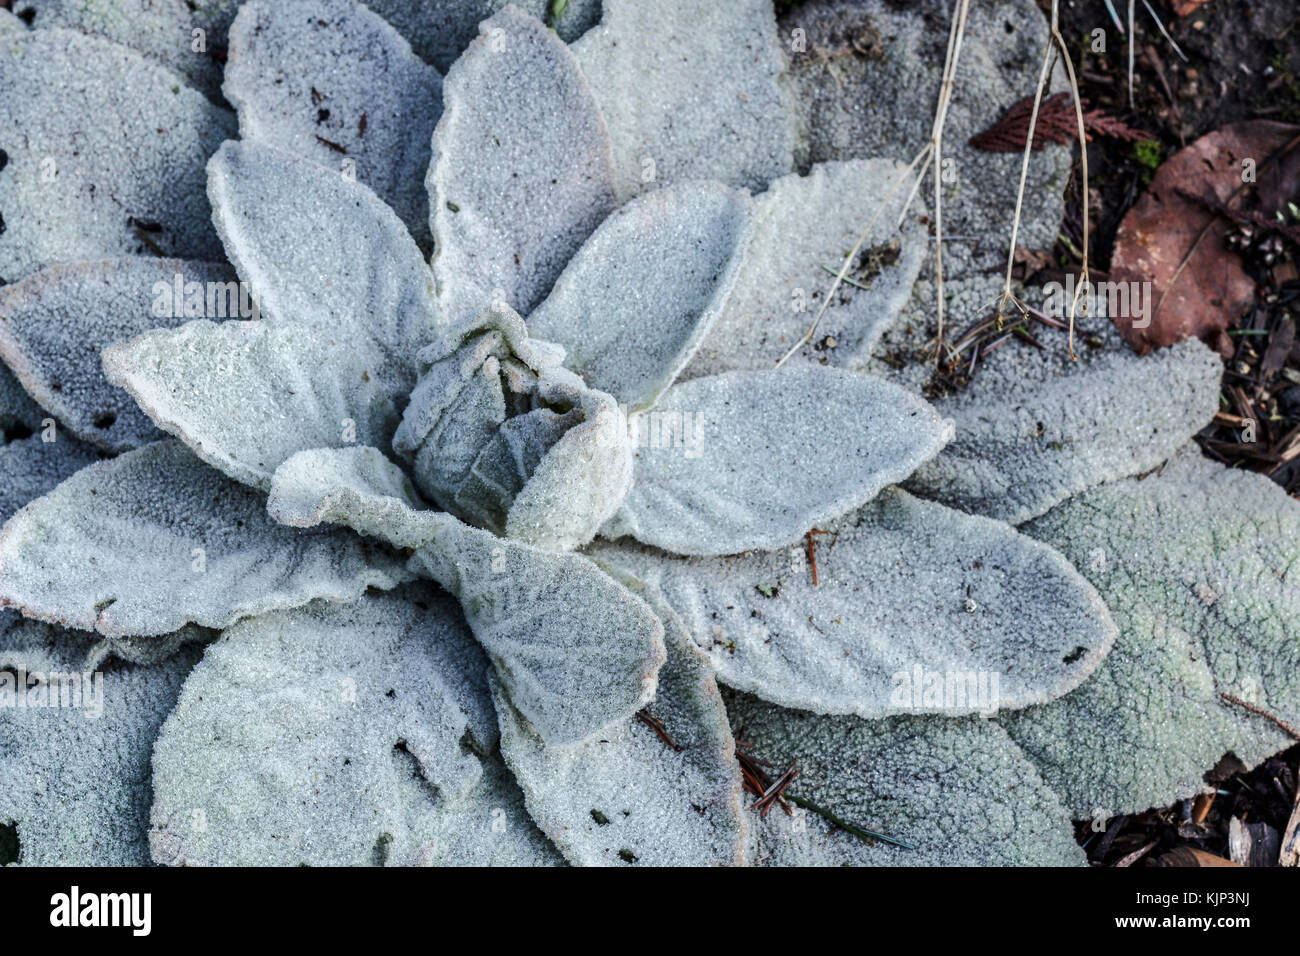 Frost coats the leaves of a common mullein (Verbasum thapsus) plant in a garden in winter. Stock Photo